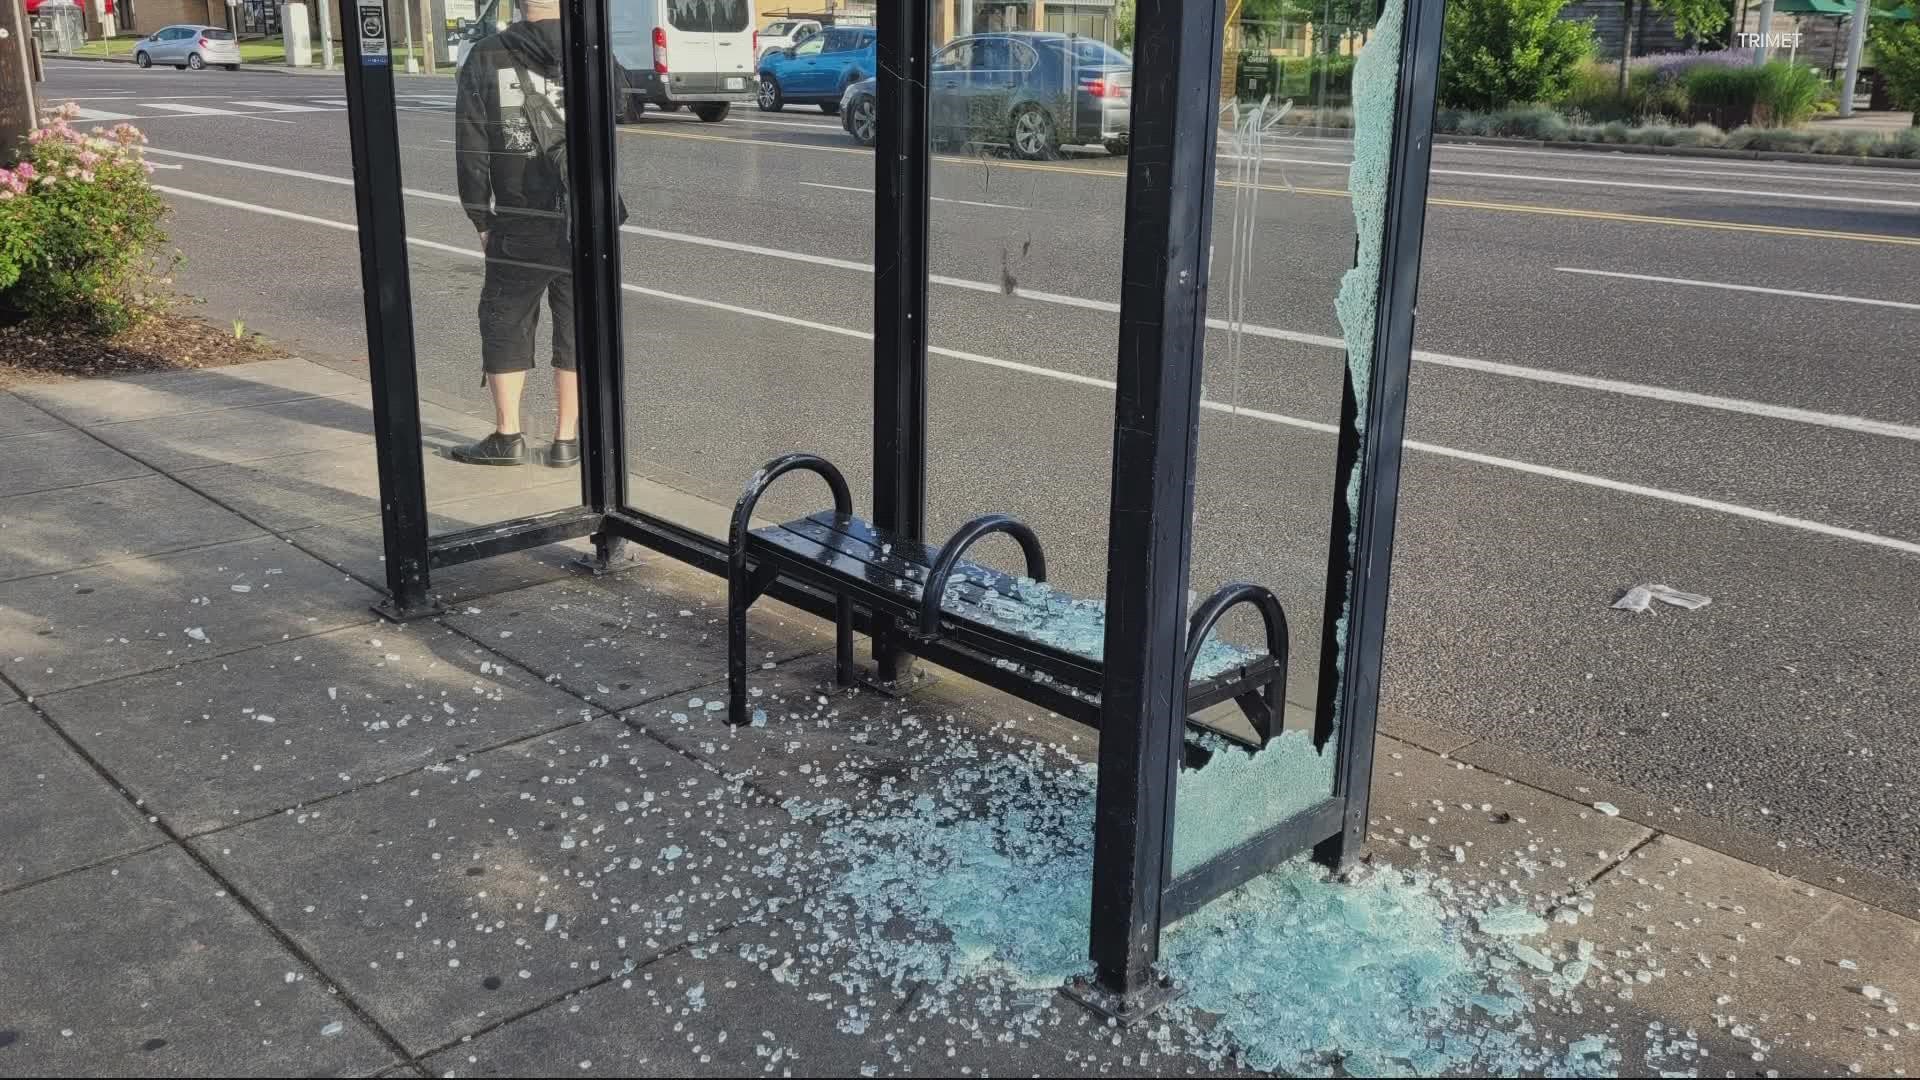 Bus shelters are regularly being vandalized across the Portland metro, and it's costing TriMet a lot of money.